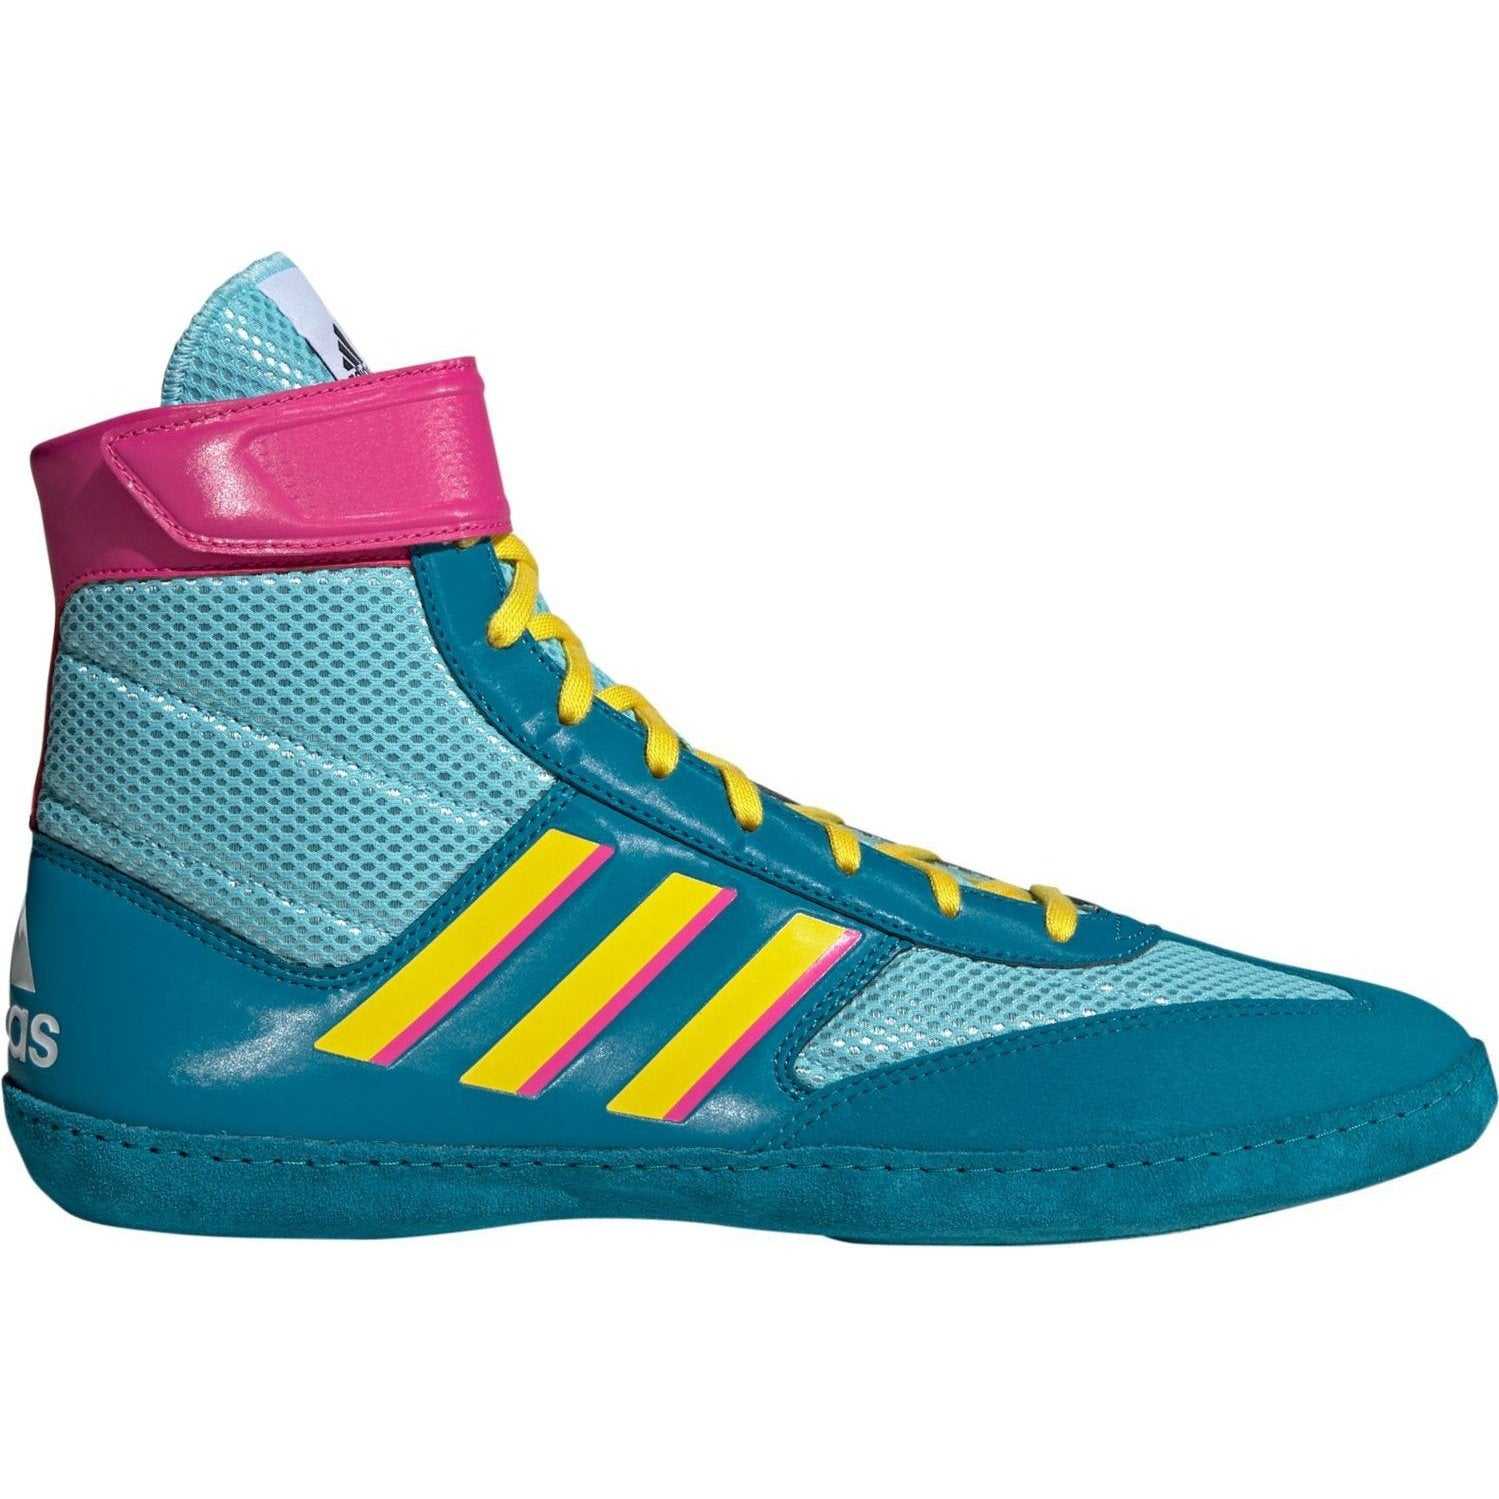 Adidas 224 Combat Speed 5 Wrestling Shoes - Aqua Yellow Teal - HIT a Double